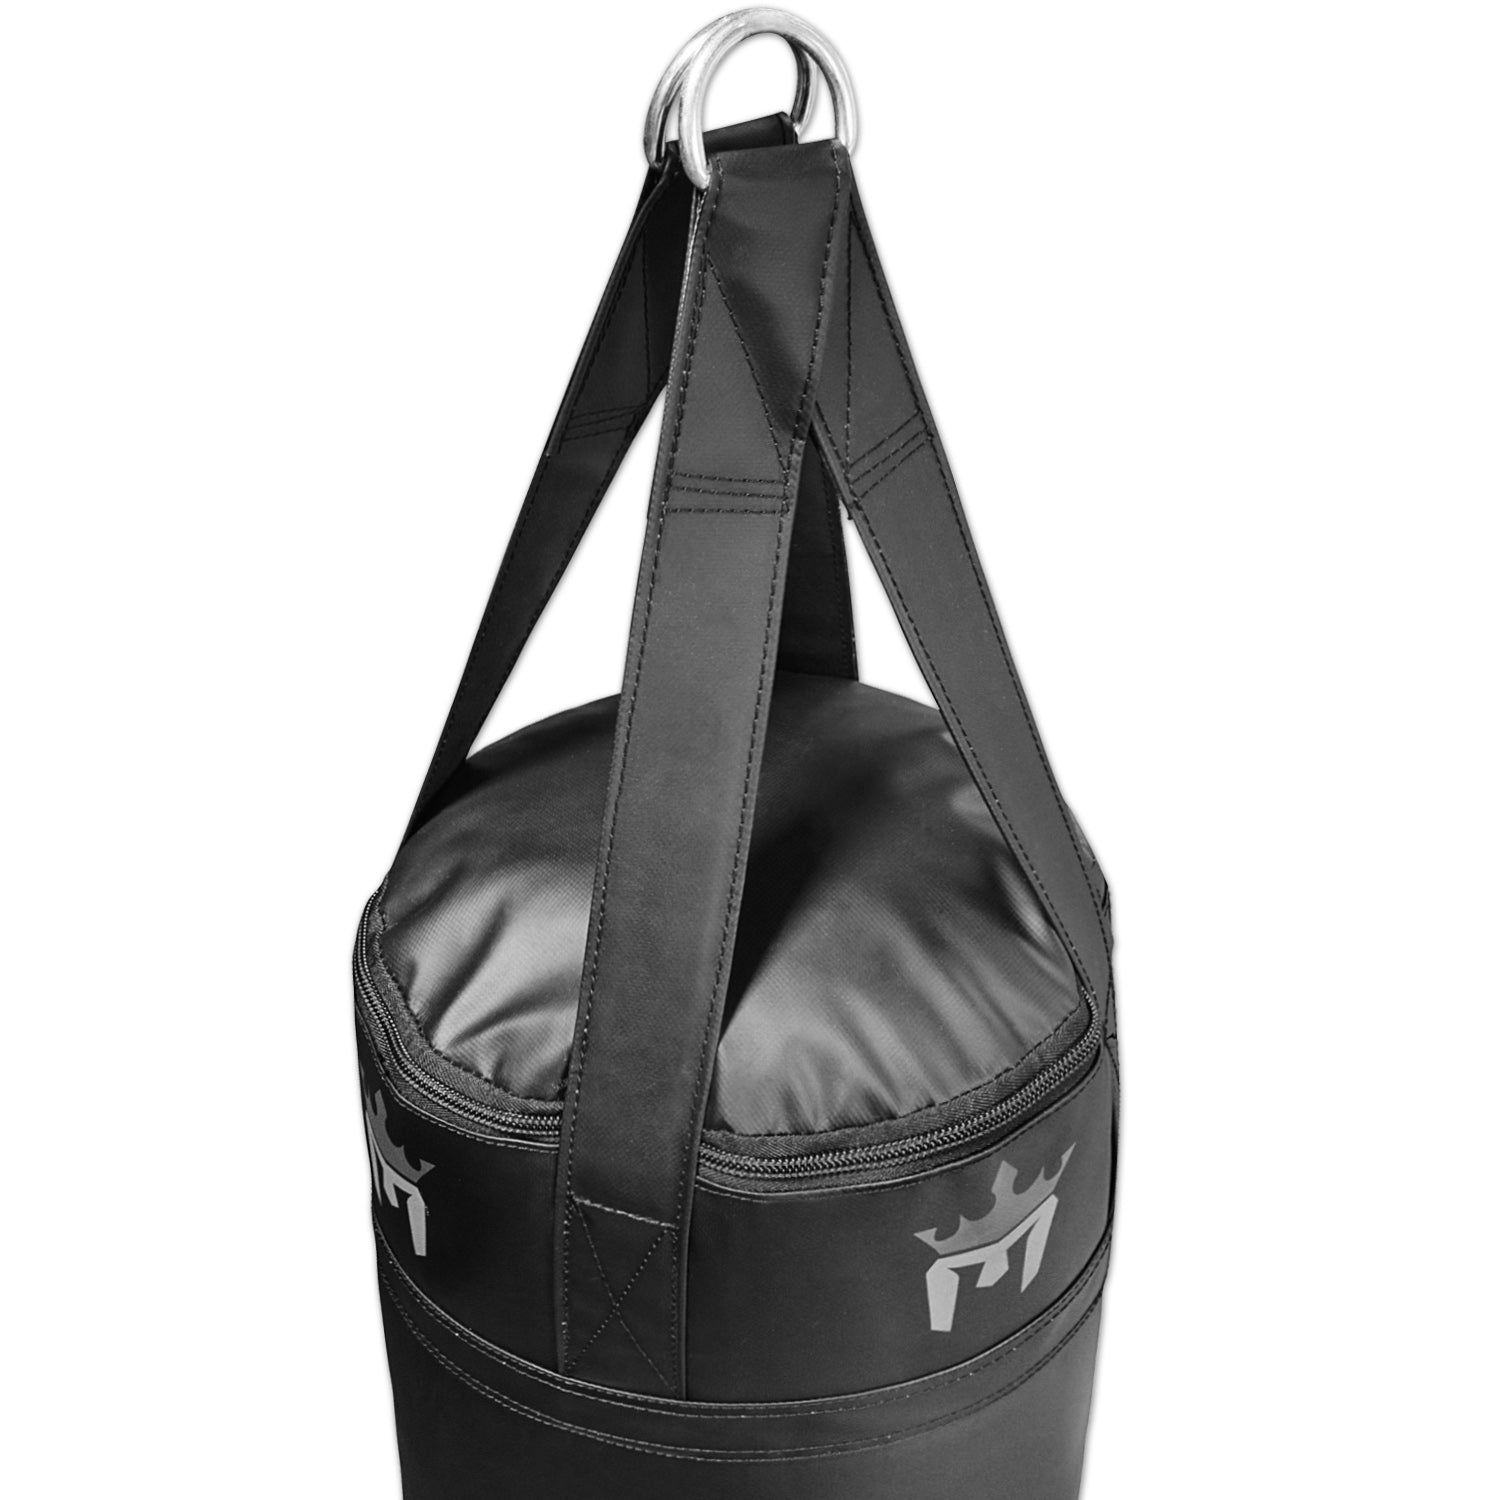 Meister 100lb Filled Heavy Bag for Boxing, MMA & Muay Thai - 60 Professional Kicking & Punching Bag - Black